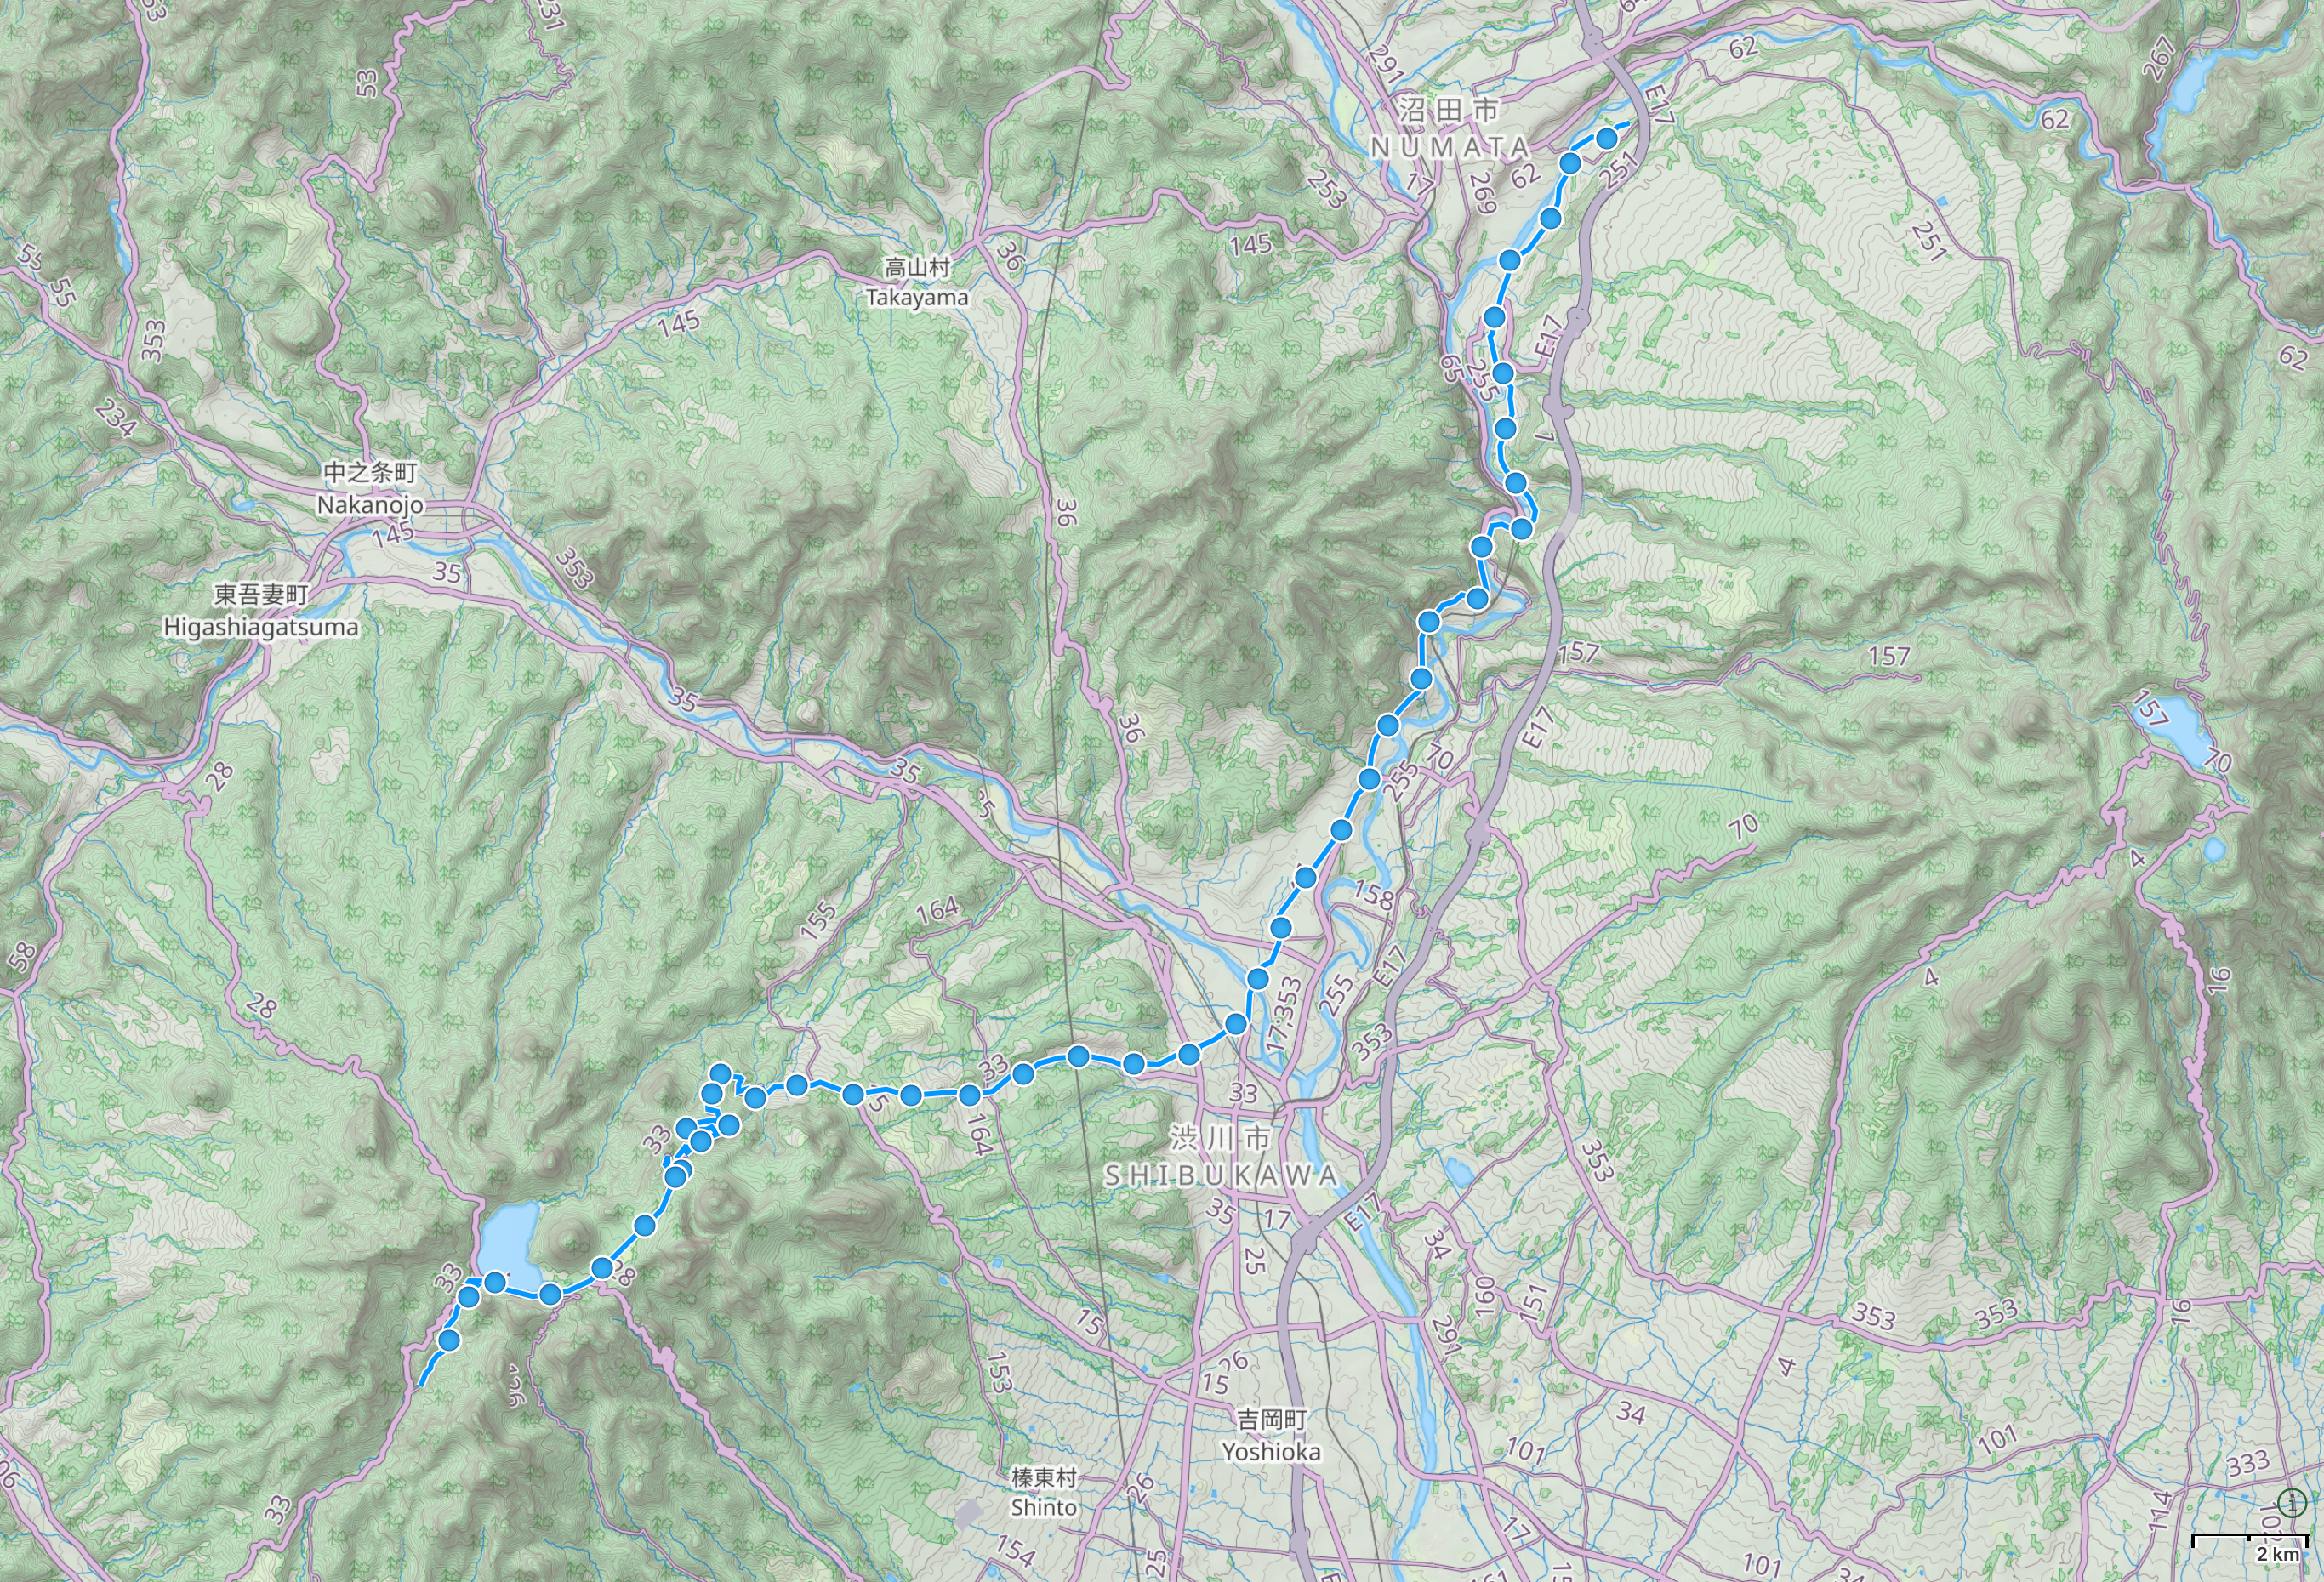 Map of Gunma with author’s route from Mount Haruna to Shōwa highlighted.